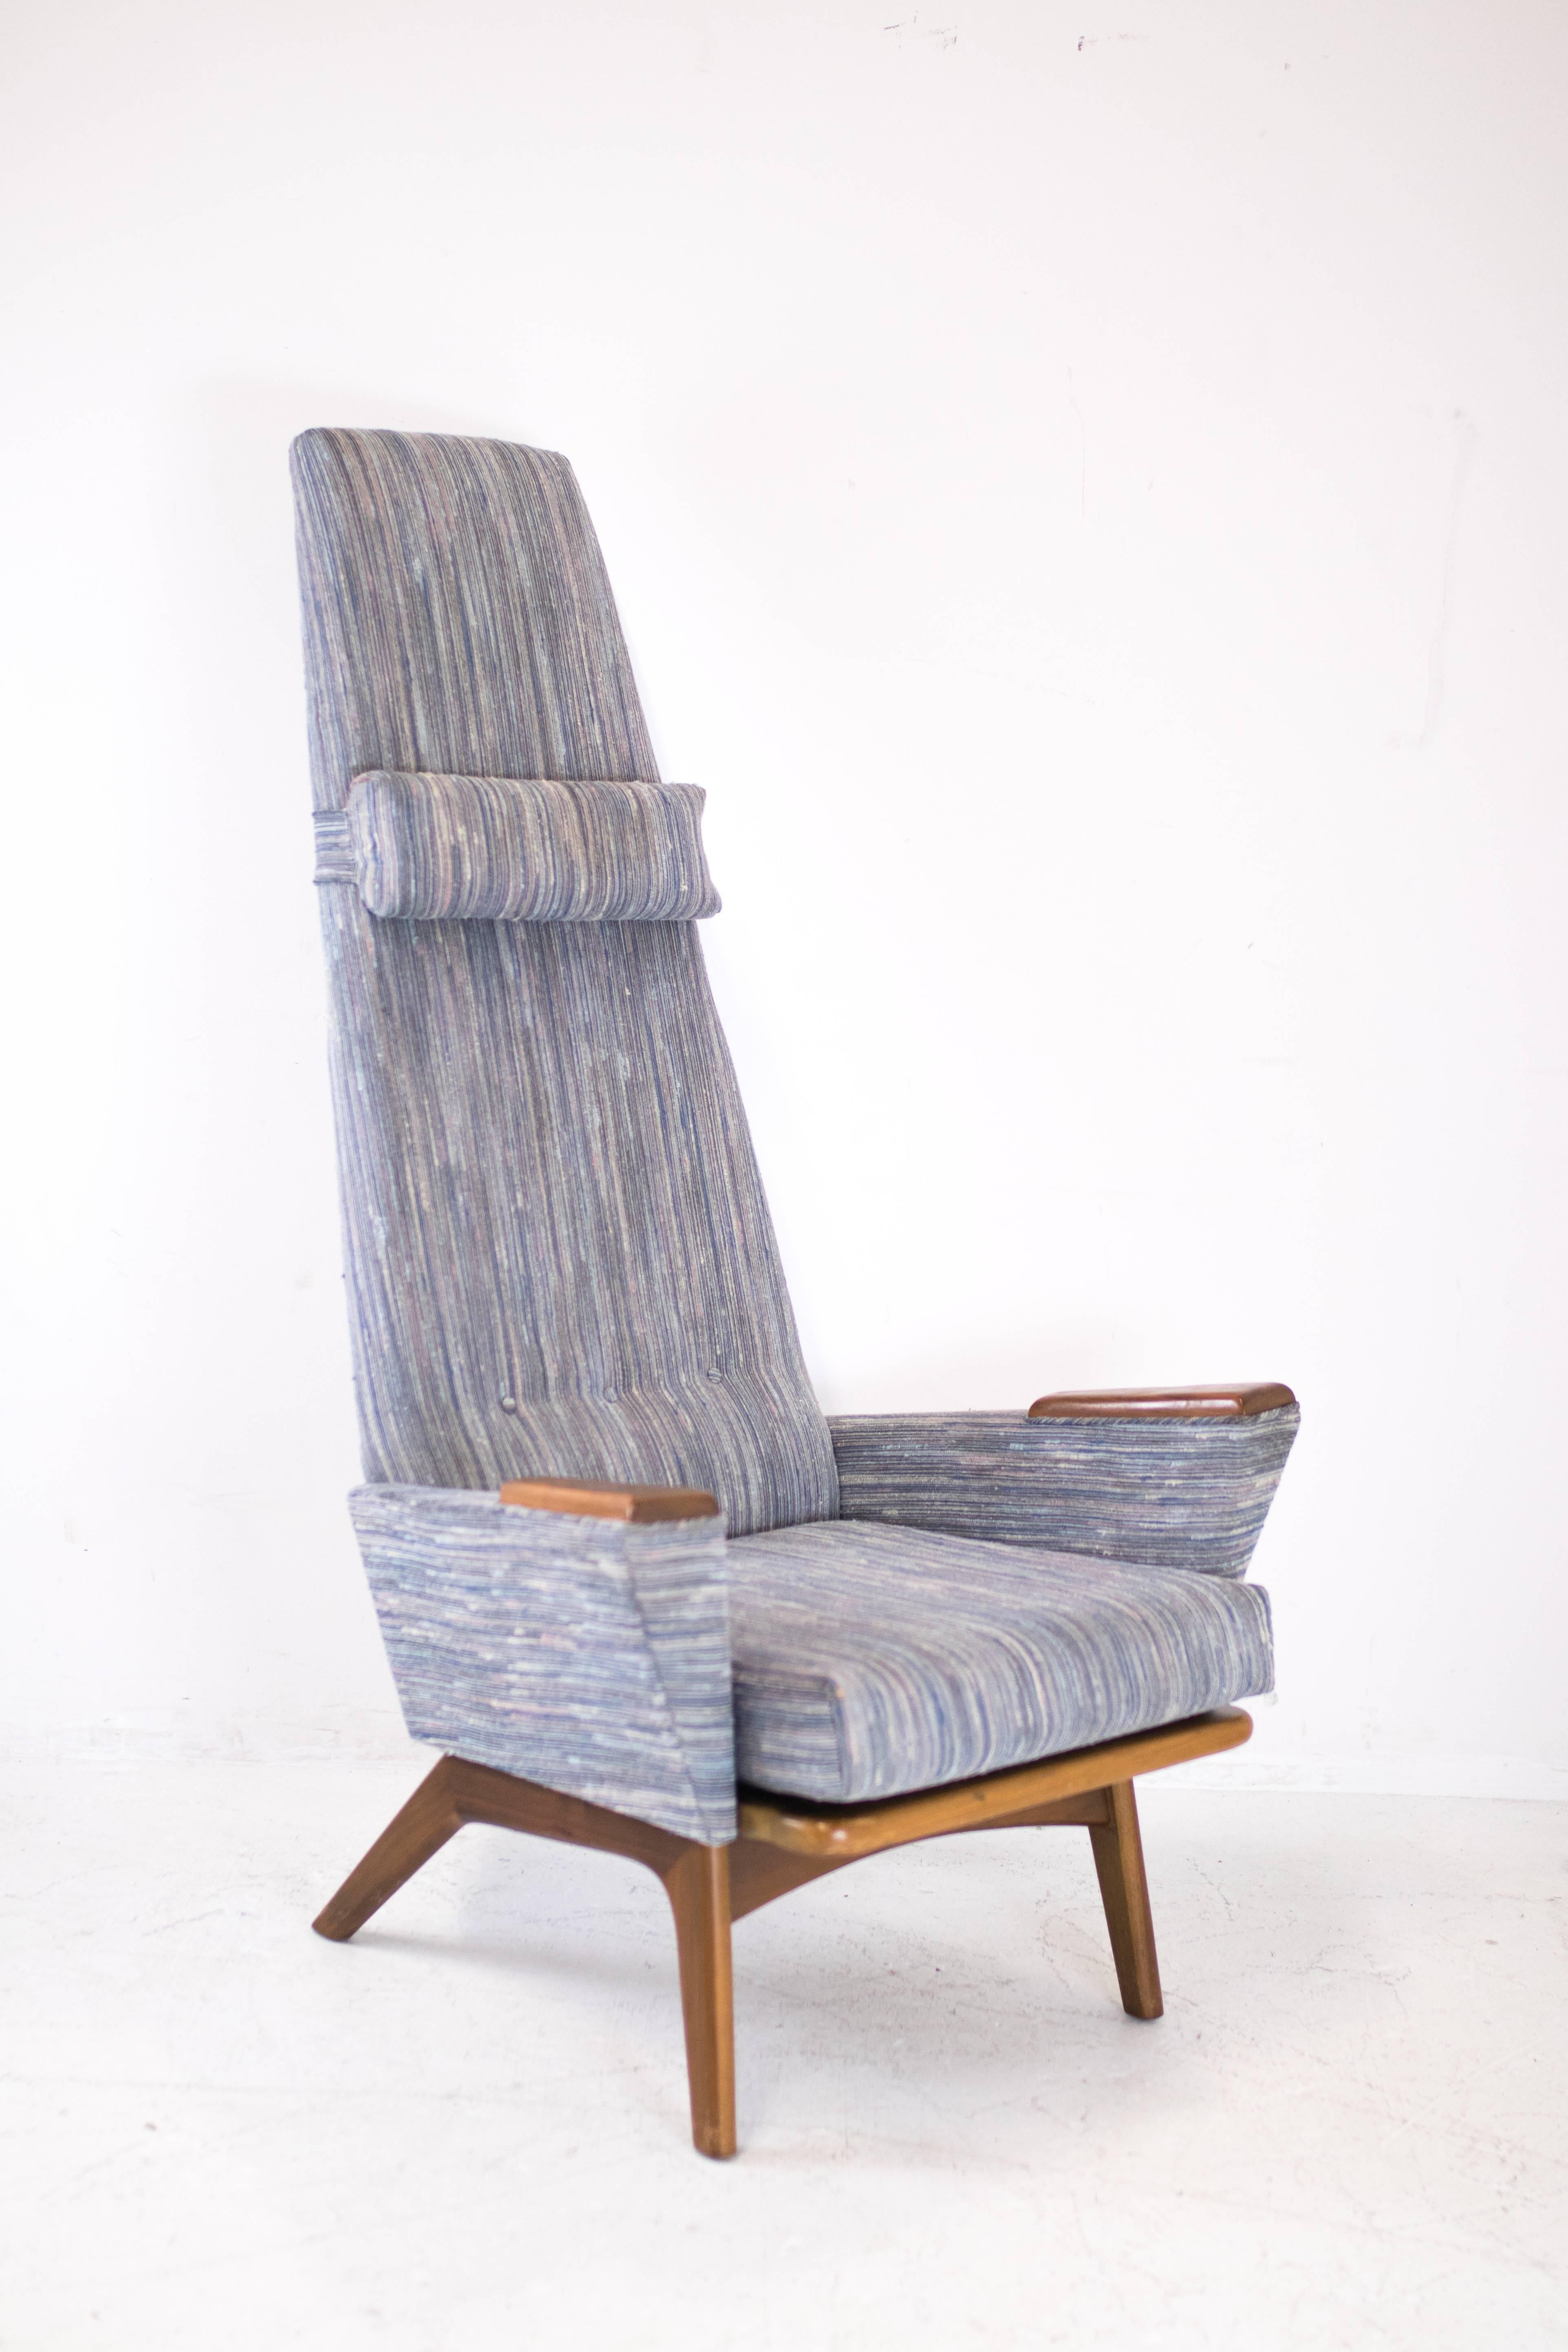 Pair of Slim Jim Lounge Chairs by Adrian Pearsall for Craft Associates 1